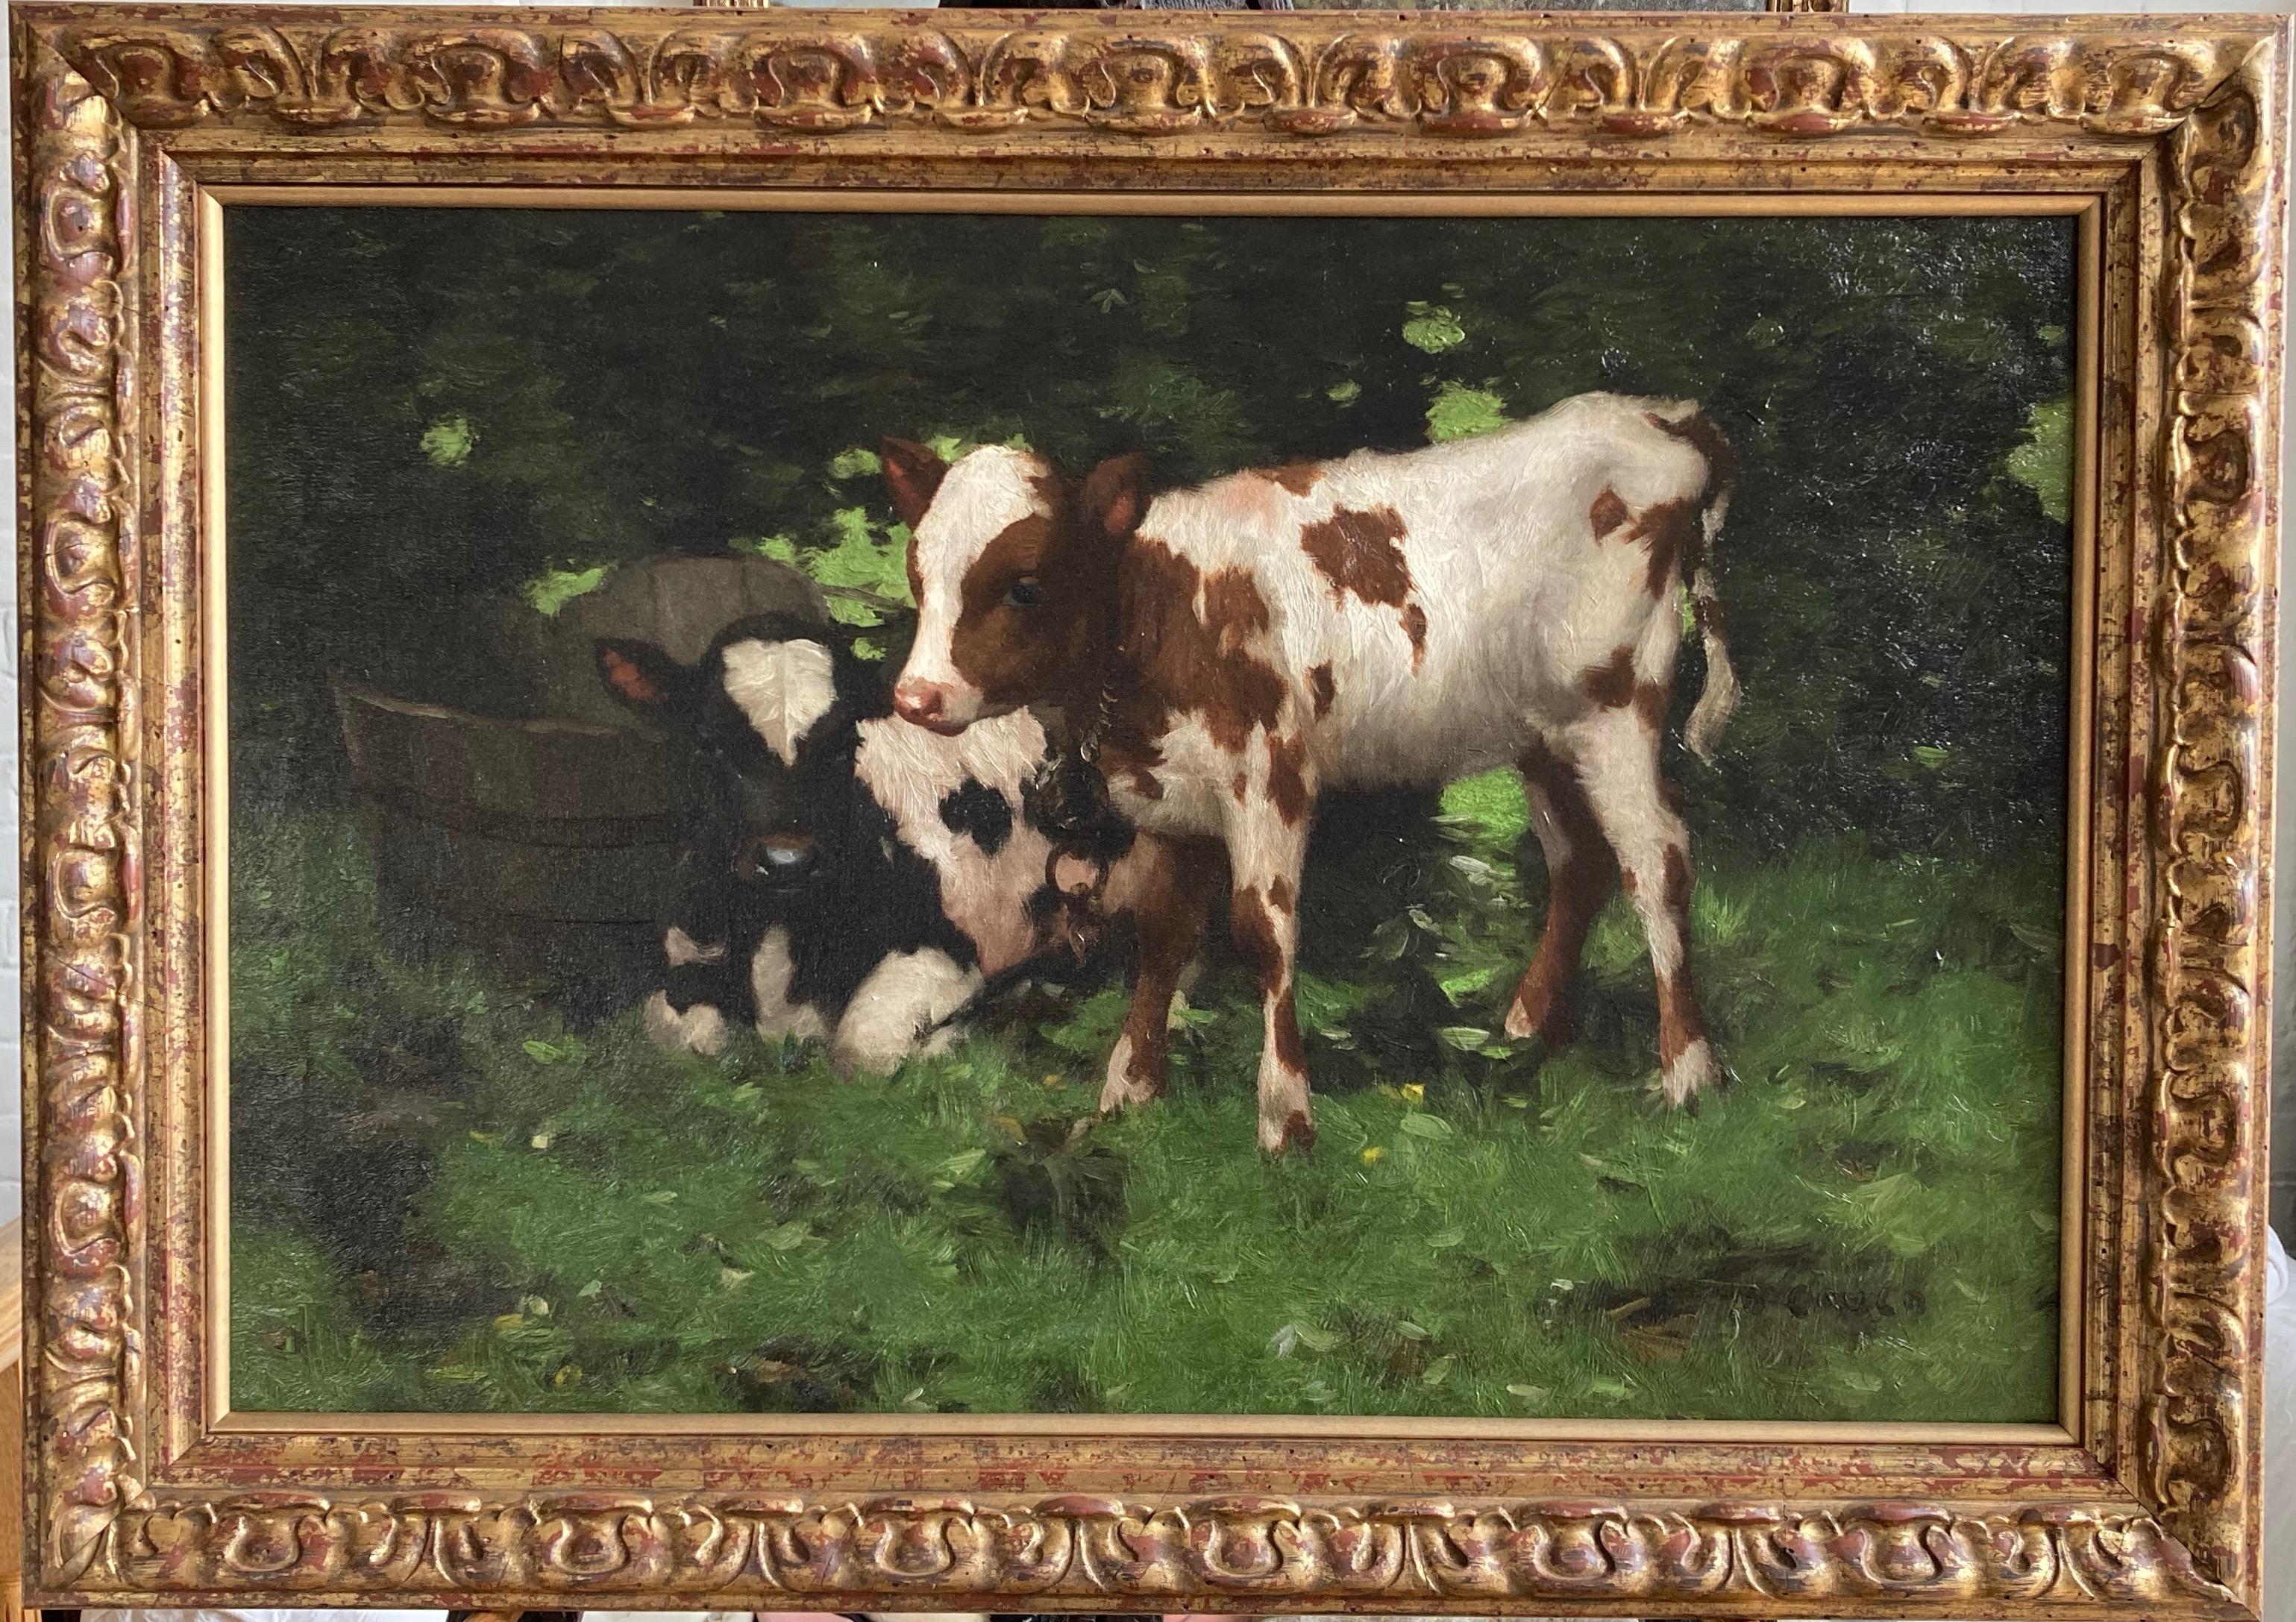 An idyllic scene of Ayrshire calves resting in a shady corner. Beautiful brushstrokes and palette.

David Gauld (1865-1936)
Calves at rest
Signed
Oil on canvas
20 x 30 inches
24½ x 34½ inches including the frame

David Gauld (1865 -1936) was born in